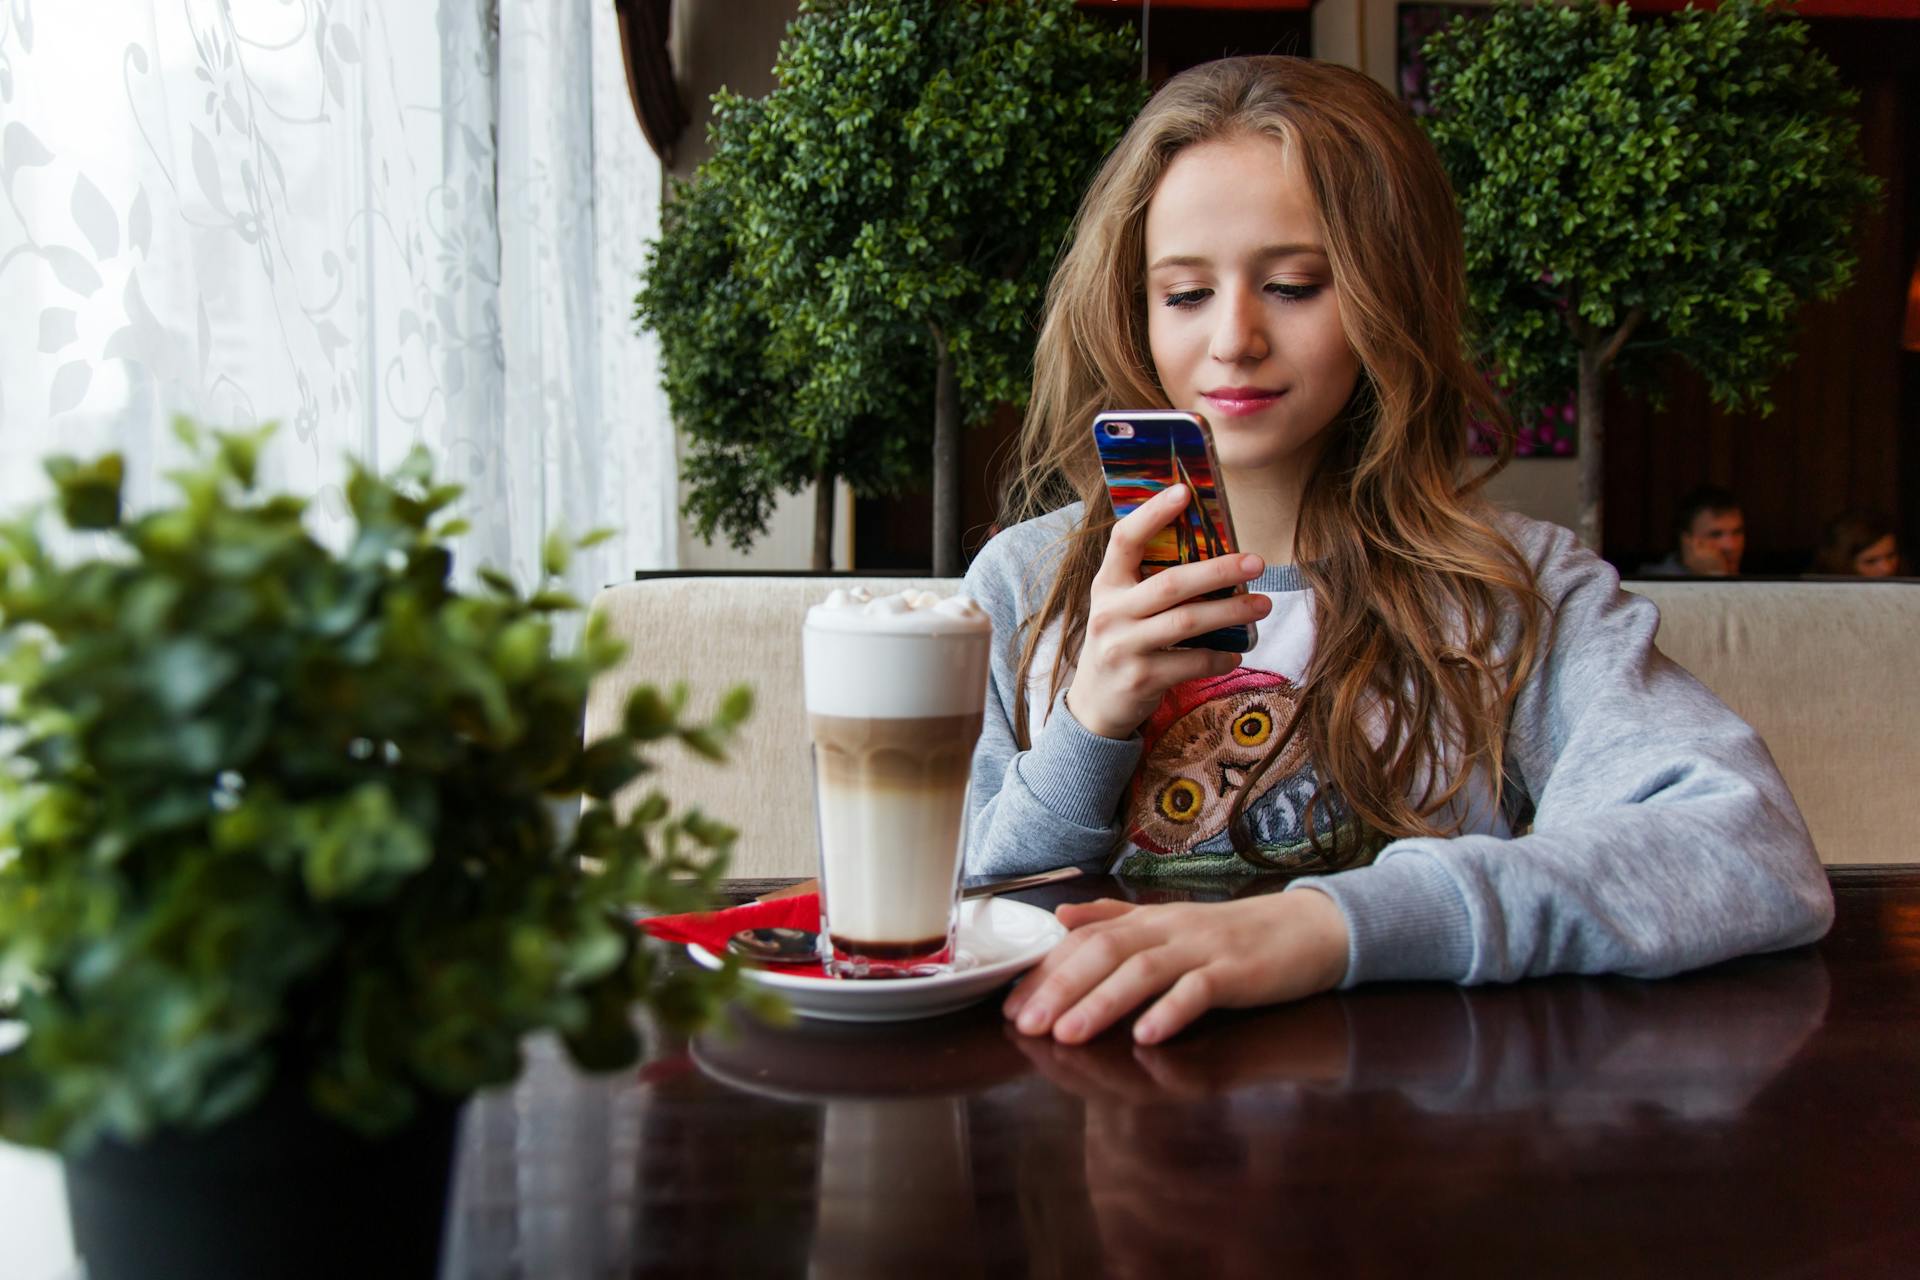 Young woman sitting a coffee shop | Source: Pexels